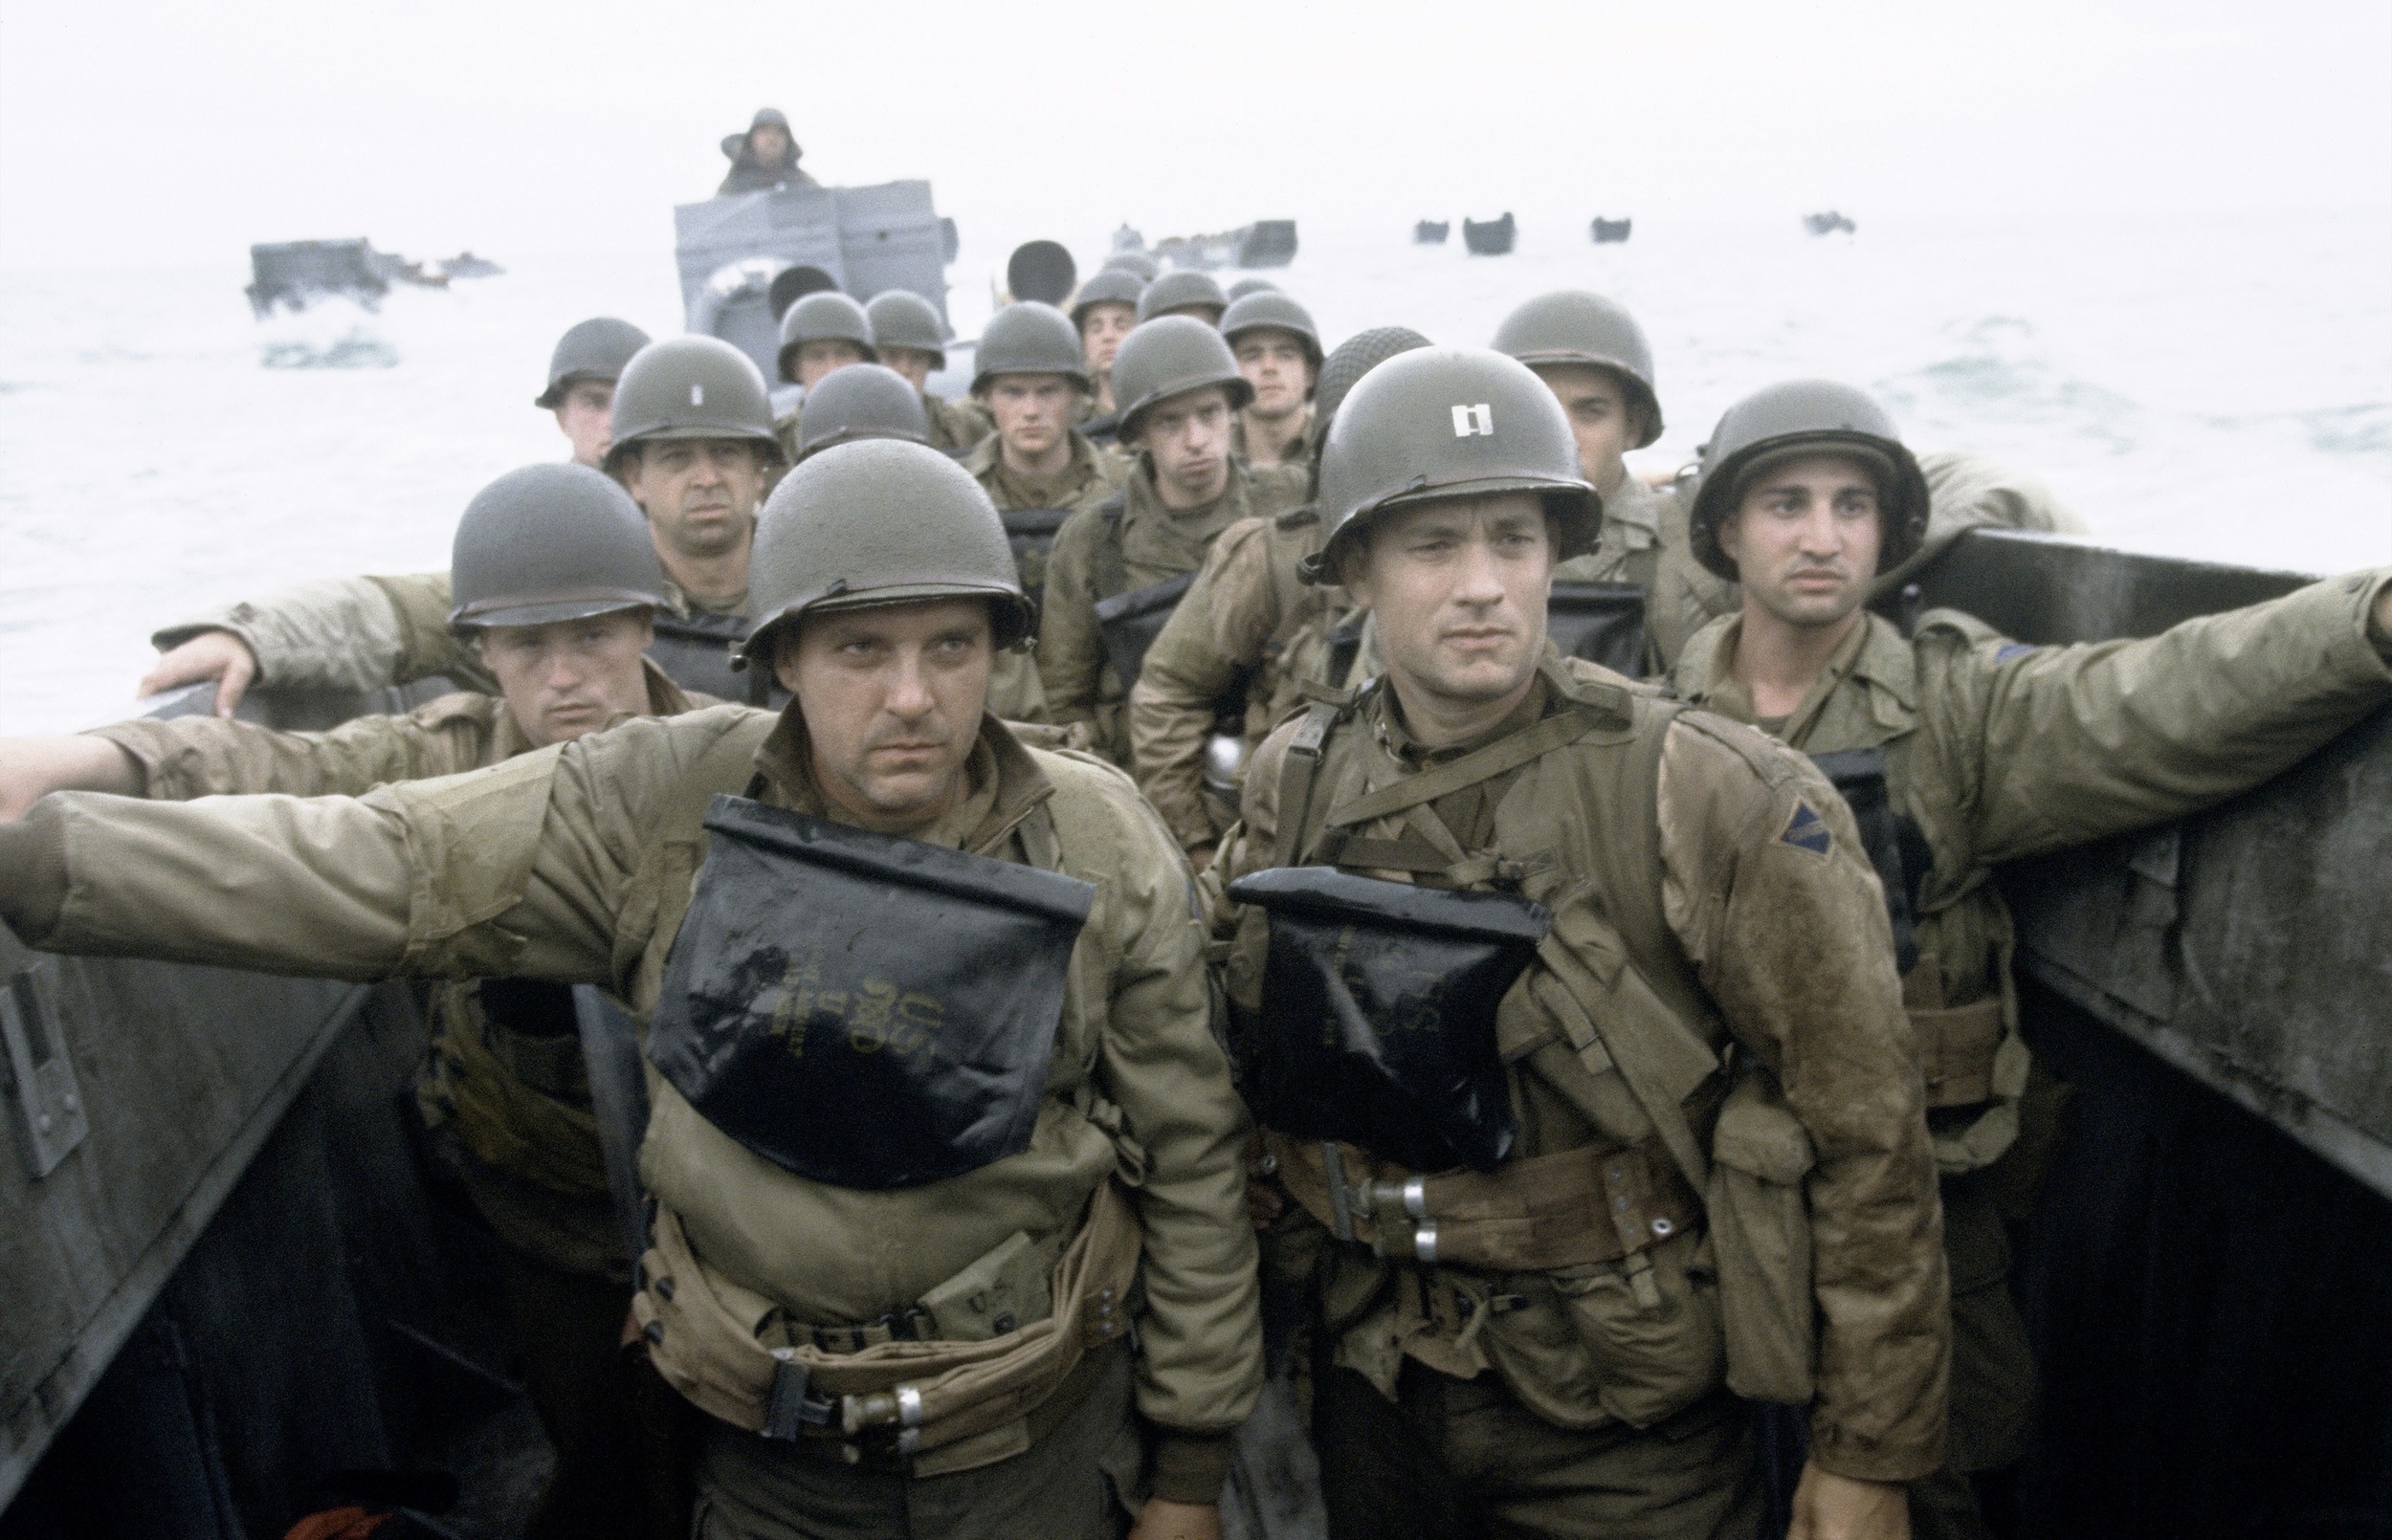 <p>As is often the case with war movies, an intensive 10-day boot camp was implemented by the production for the cast. However, Spielberg did not do it to teach them proper military techniques. Instead, he <a href="https://www.rogerebert.com/interviews/private-spielberg" rel="noopener noreferrer">told Roger Ebert</a> he wanted them to “respect what it was like to be a soldier.”</p><p><a href='https://www.msn.com/en-us/community/channel/vid-cj9pqbr0vn9in2b6ddcd8sfgpfq6x6utp44fssrv6mc2gtybw0us'>Follow us on MSN to see more of our exclusive entertainment content.</a></p>